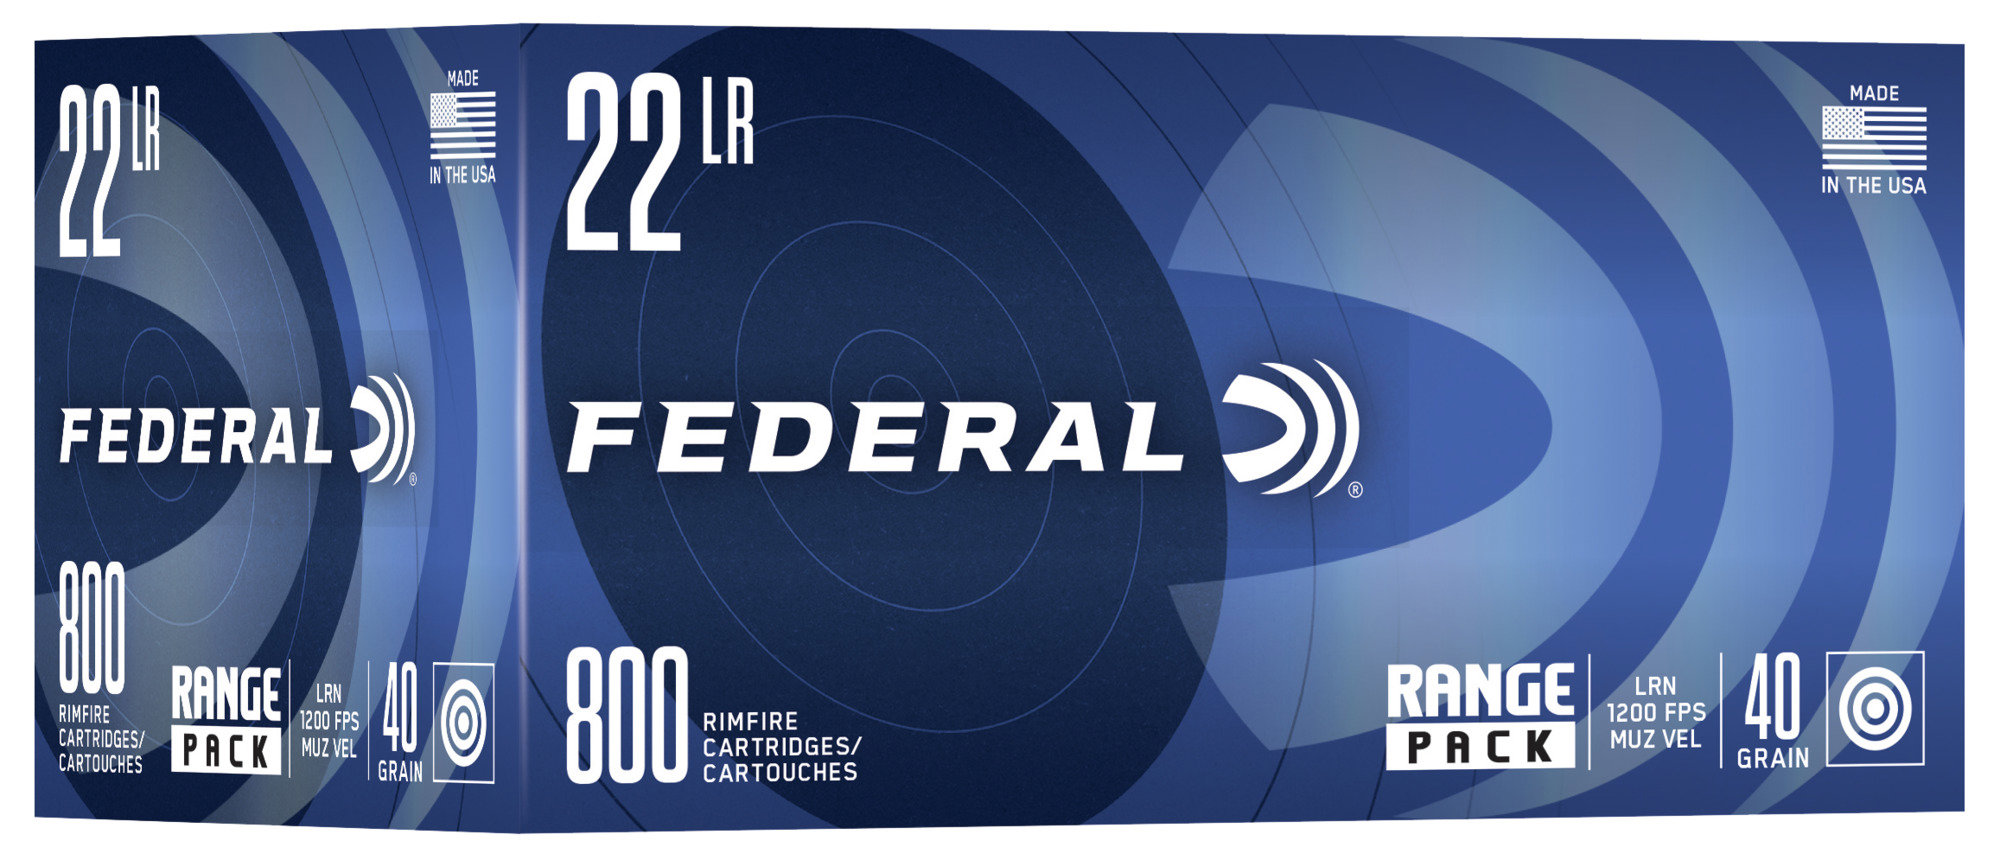 federal-ammo-range-pack-22lr-40gr-lead-round-nose-ammunition-800-rounds-kygunco